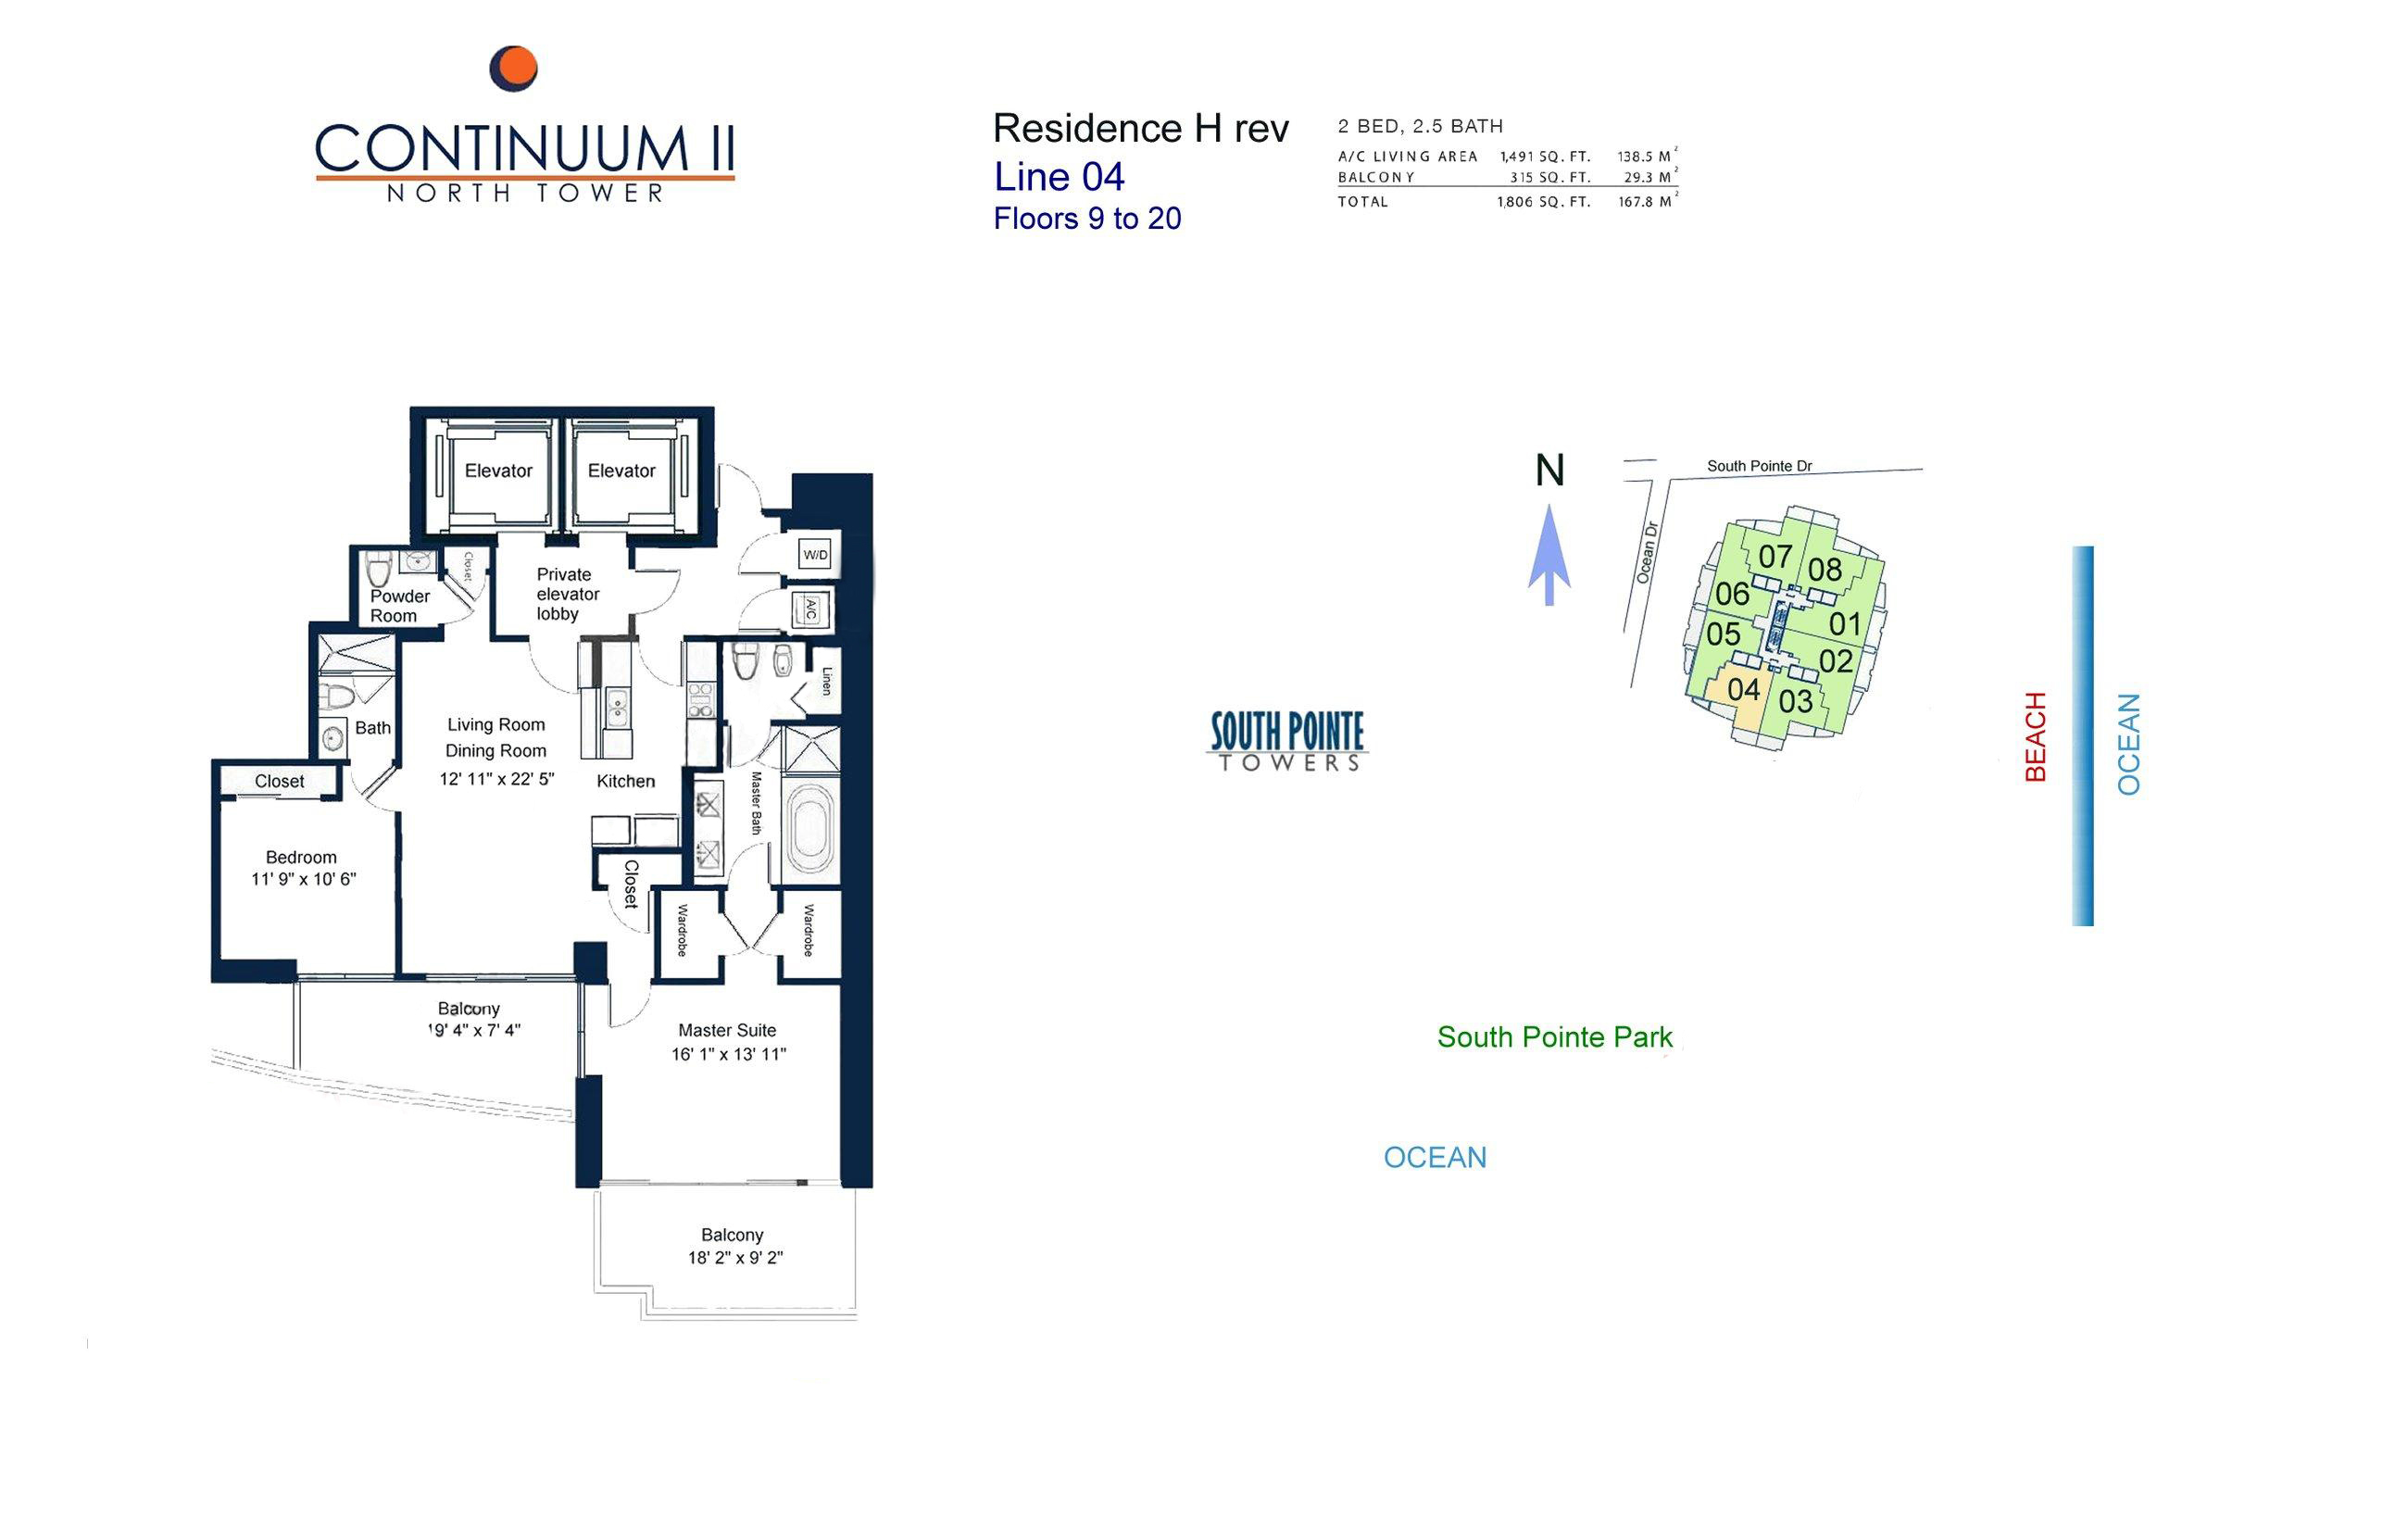 Continuum North Tower Residence H rev Line 04